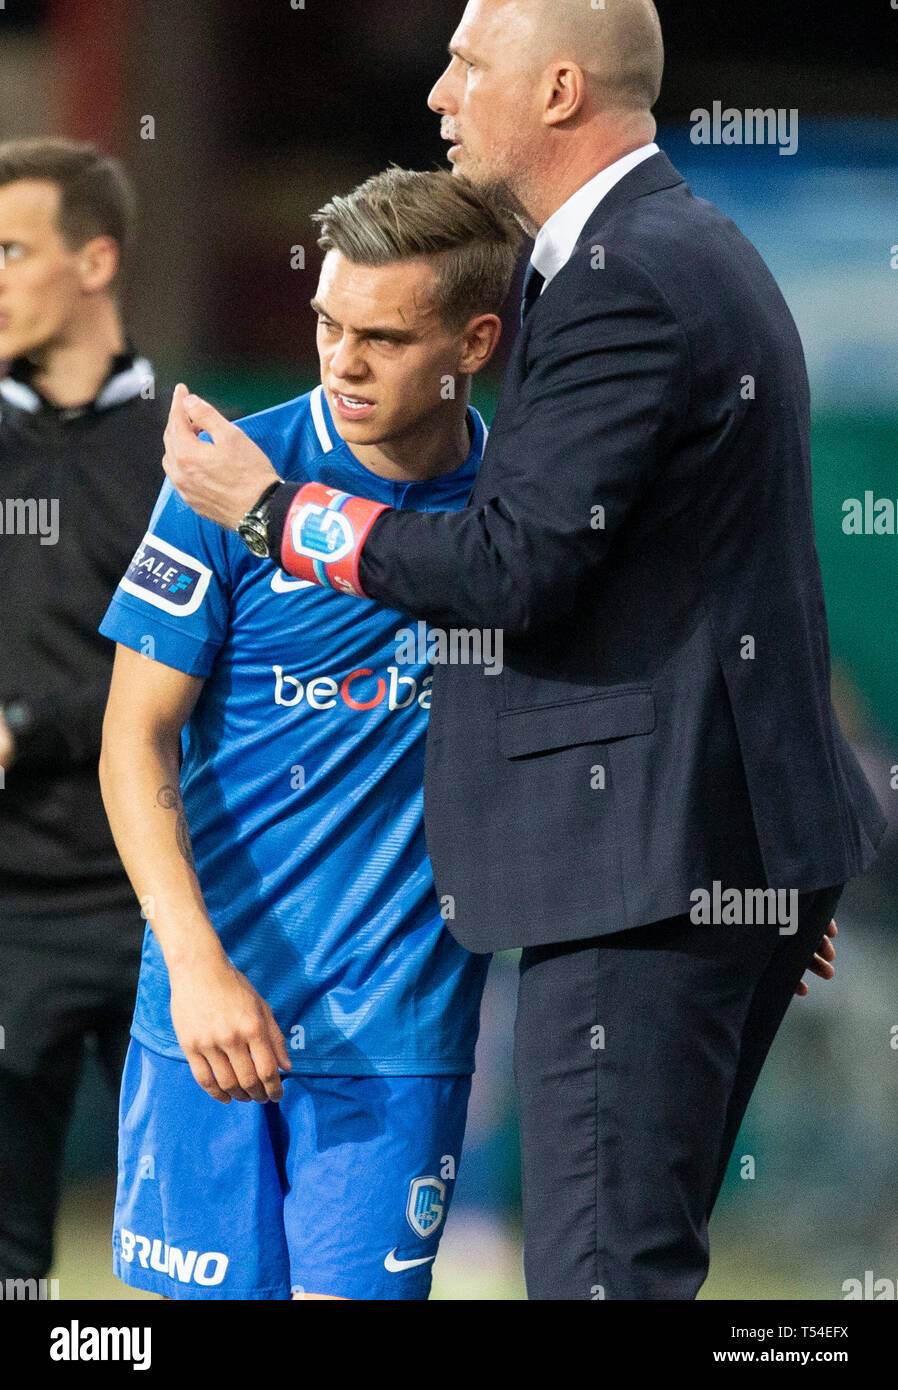 liege-belgium-19th-apr-2019-liege-sclessin-belgium-april-19th-leandro-trossard-of-genk-applausvervanging-and-hug-with-philippe-clement-head-coach-of-genk-during-the-jupiler-pro-league-play-off-1-match-day-5-between-standard-de-liege-vs-krc-genk-on-april-19th-2019-in-liege-credit-pro-shotsalamy-live-news-T54EFX.jpg